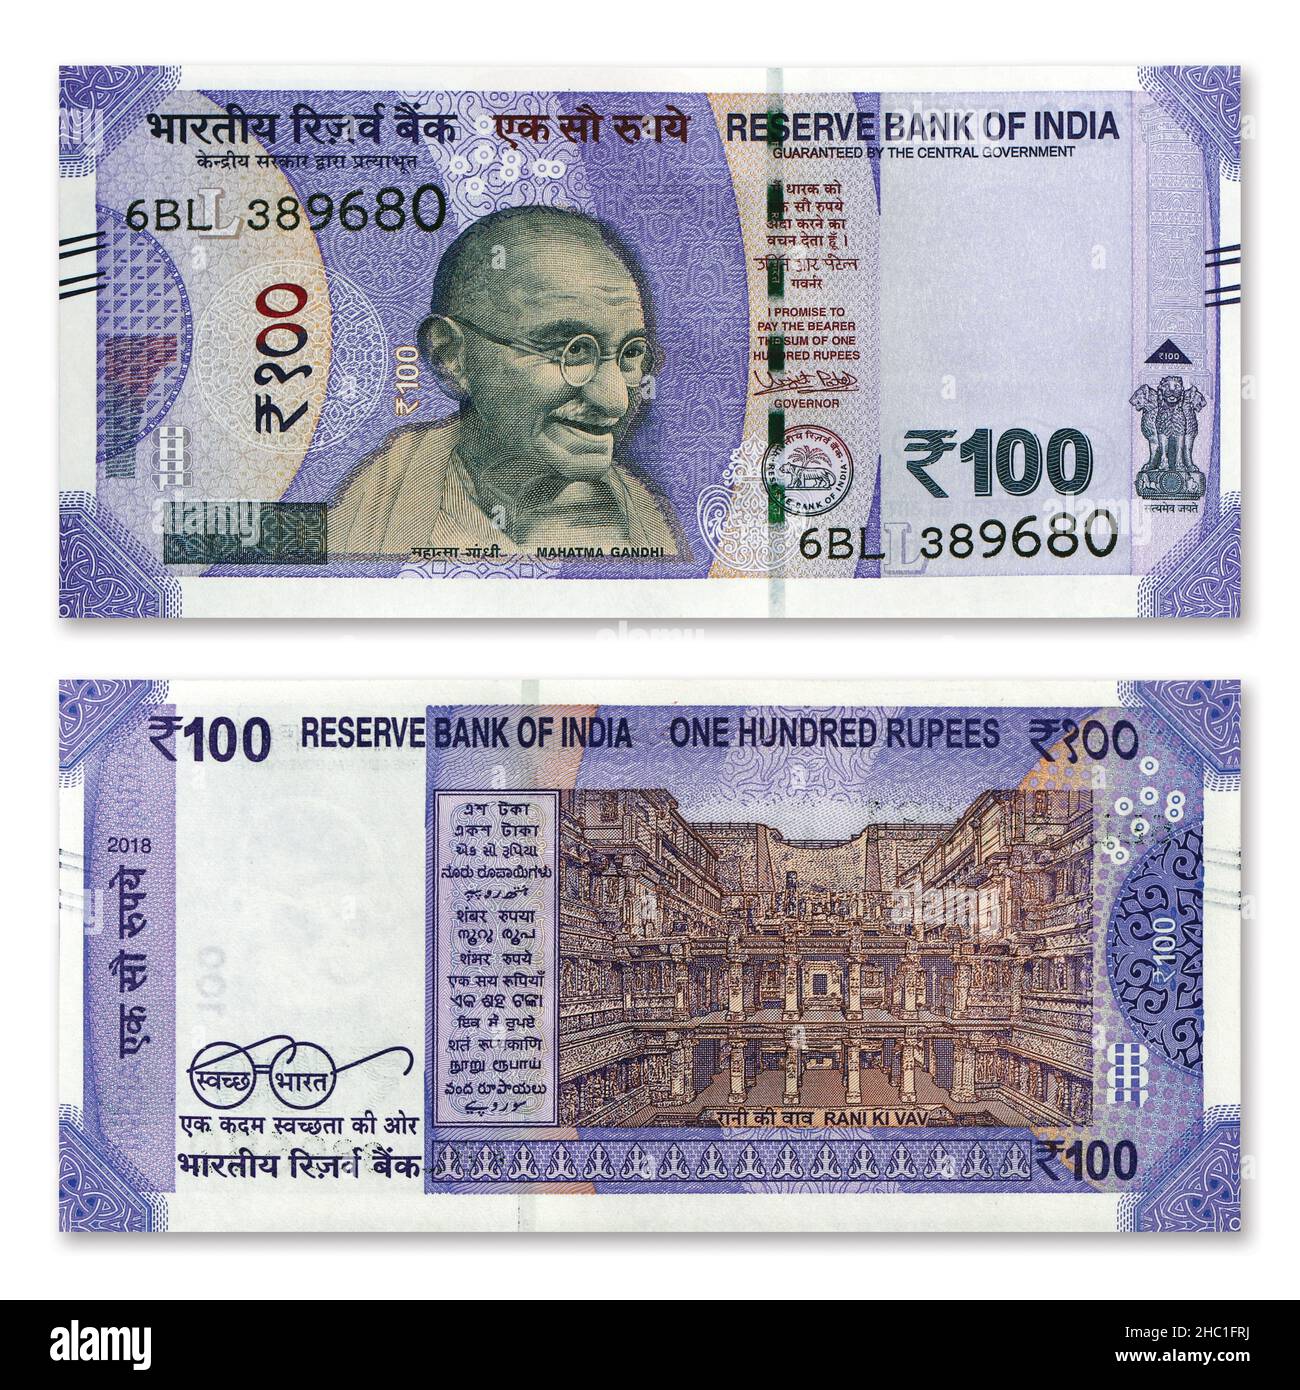 Indian 100 rupee paper currency new note front and back side design isolated on white background Stock Photo